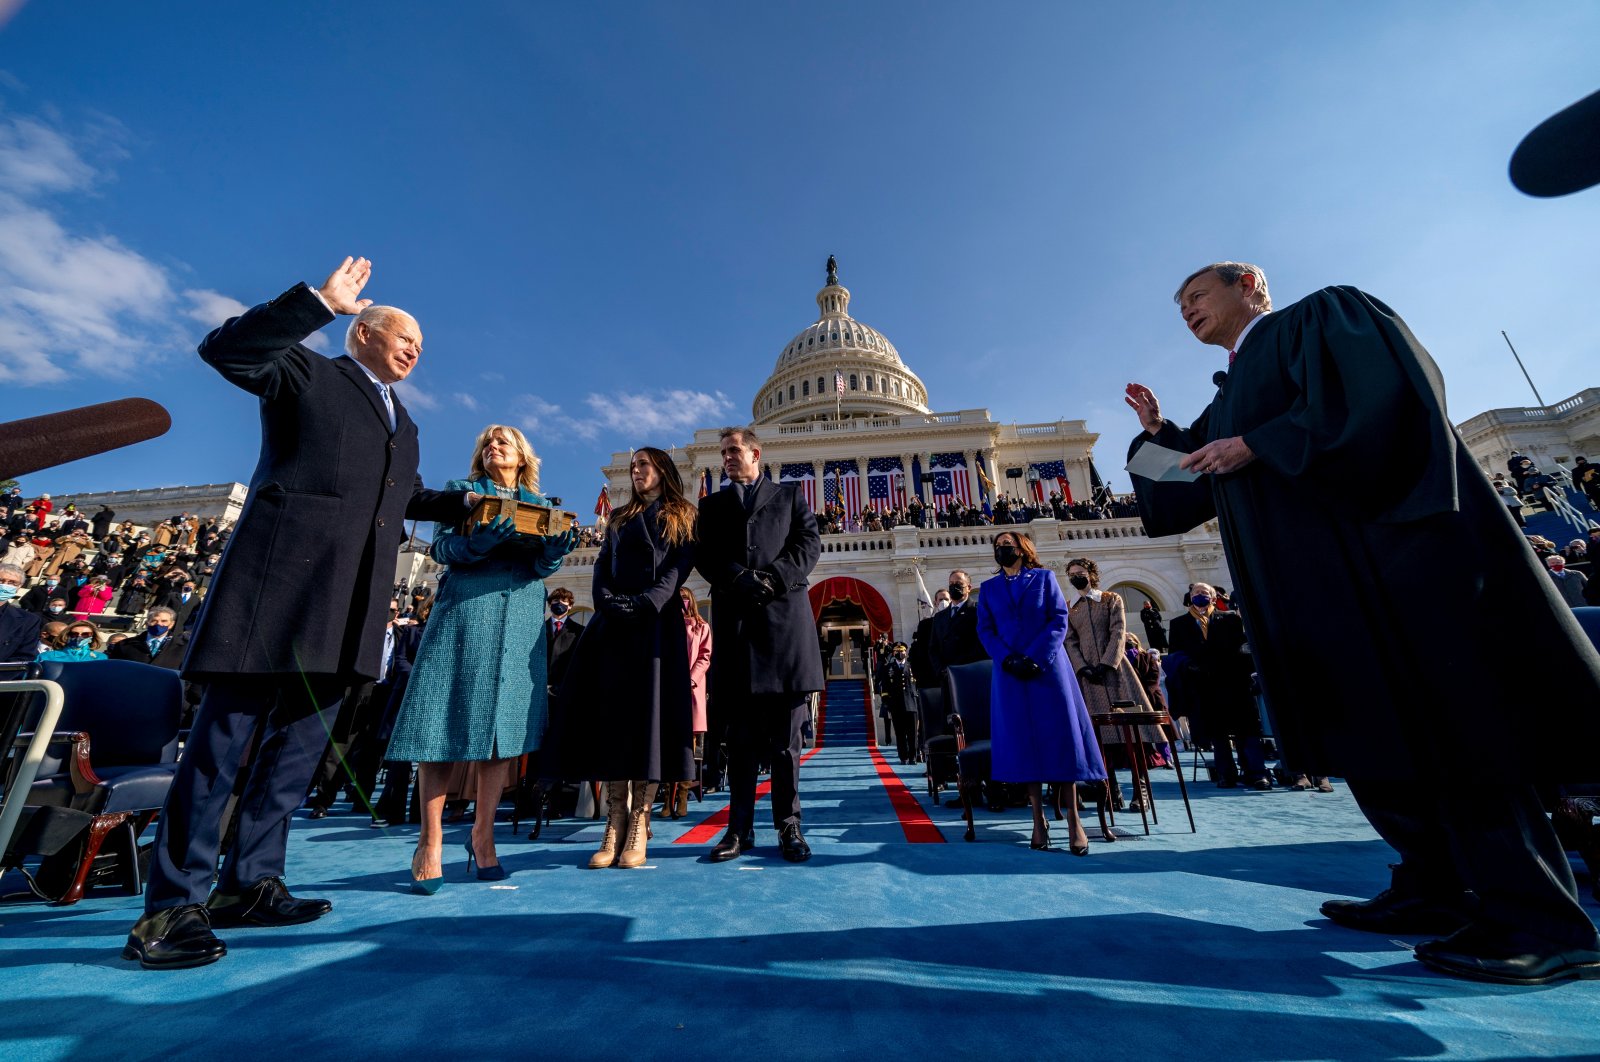 Joe Biden is sworn in as the 46th president of the United States as Jill Biden holds the Bible during the inauguration at the U.S. Capitol, Washington, D.C., the U.S., Jan. 20, 2021. (Reuters Photo)